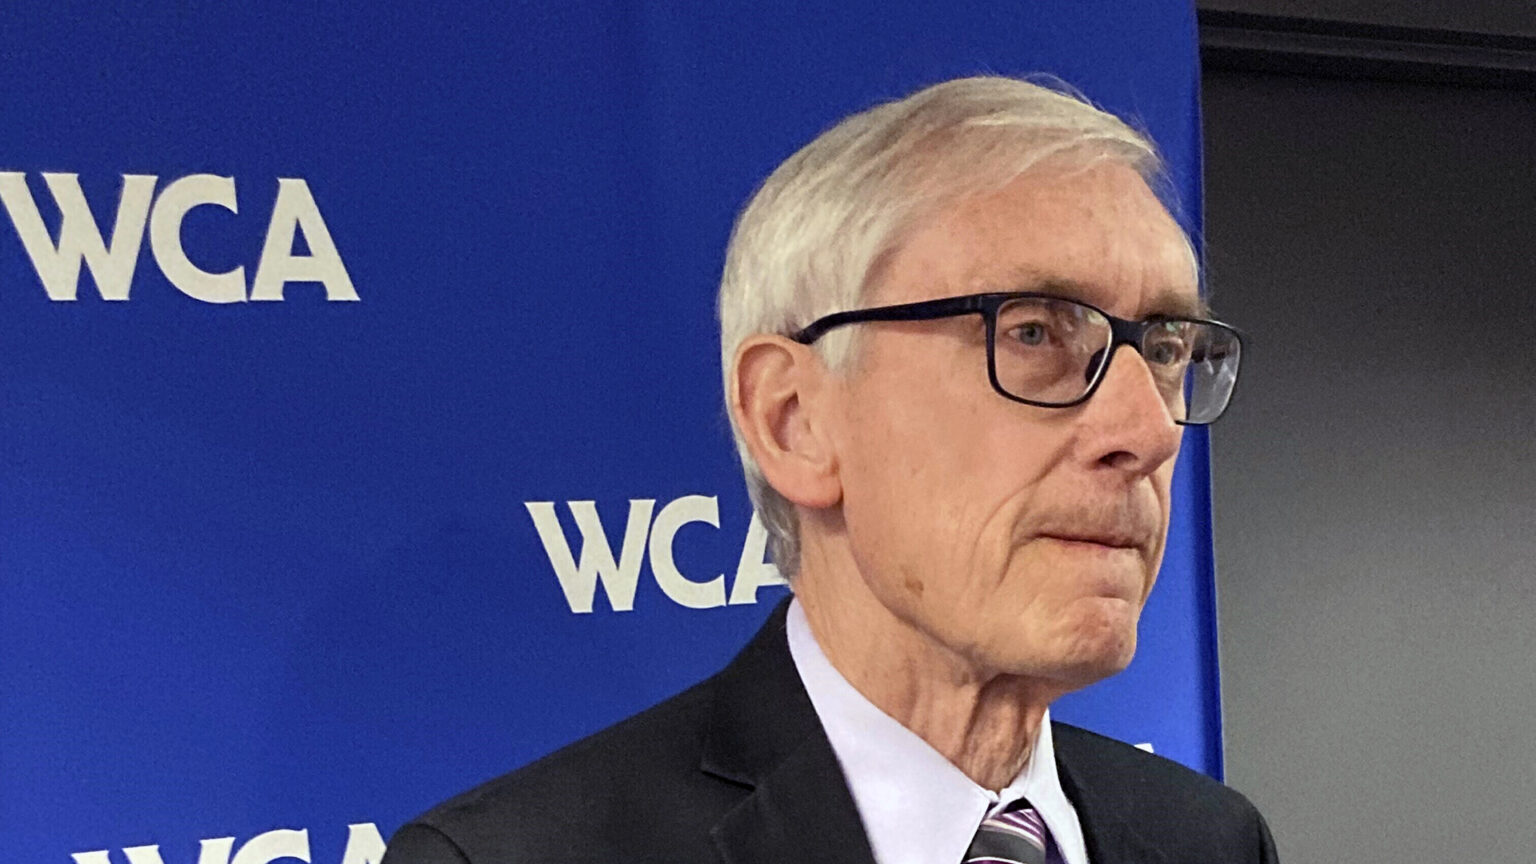 Tony Evers listens while standing in front of a logo backdrop banner with a repeated WCA wordmark.